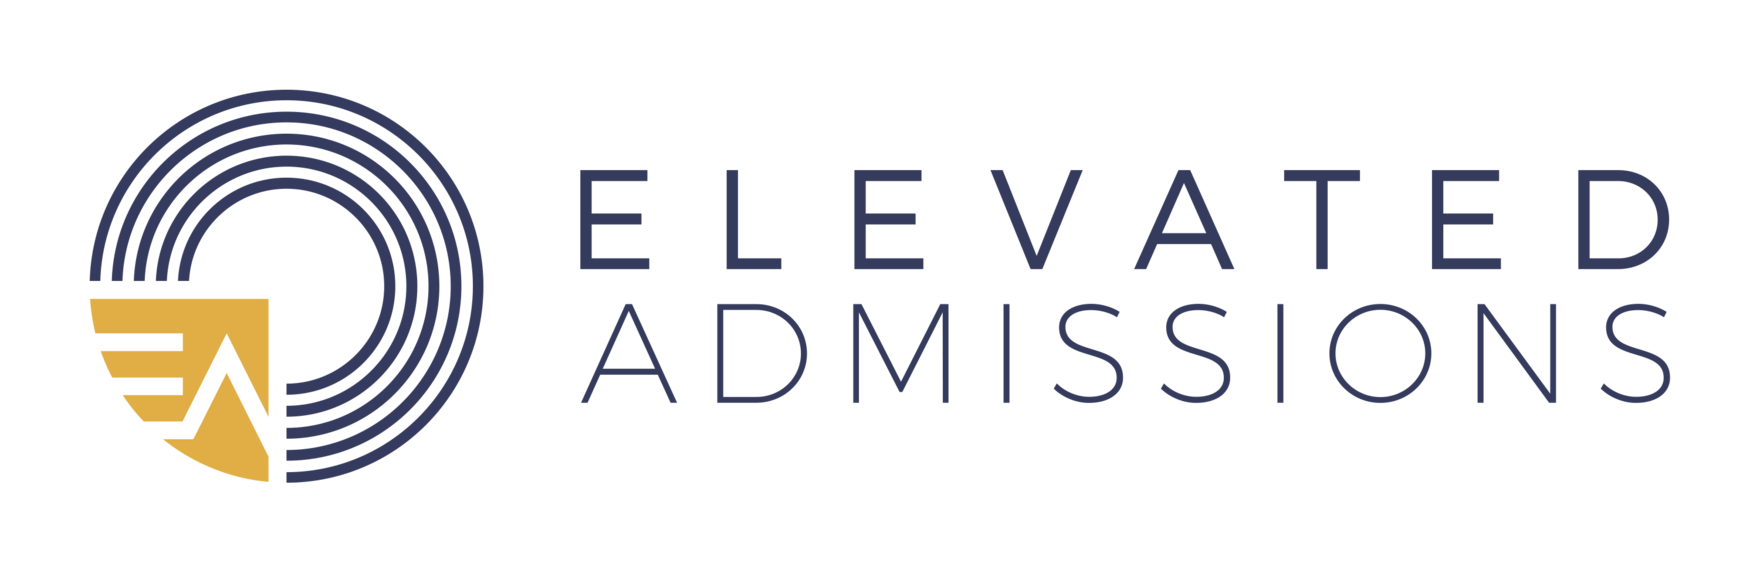 Elevated-Admissions-Logo-PNG